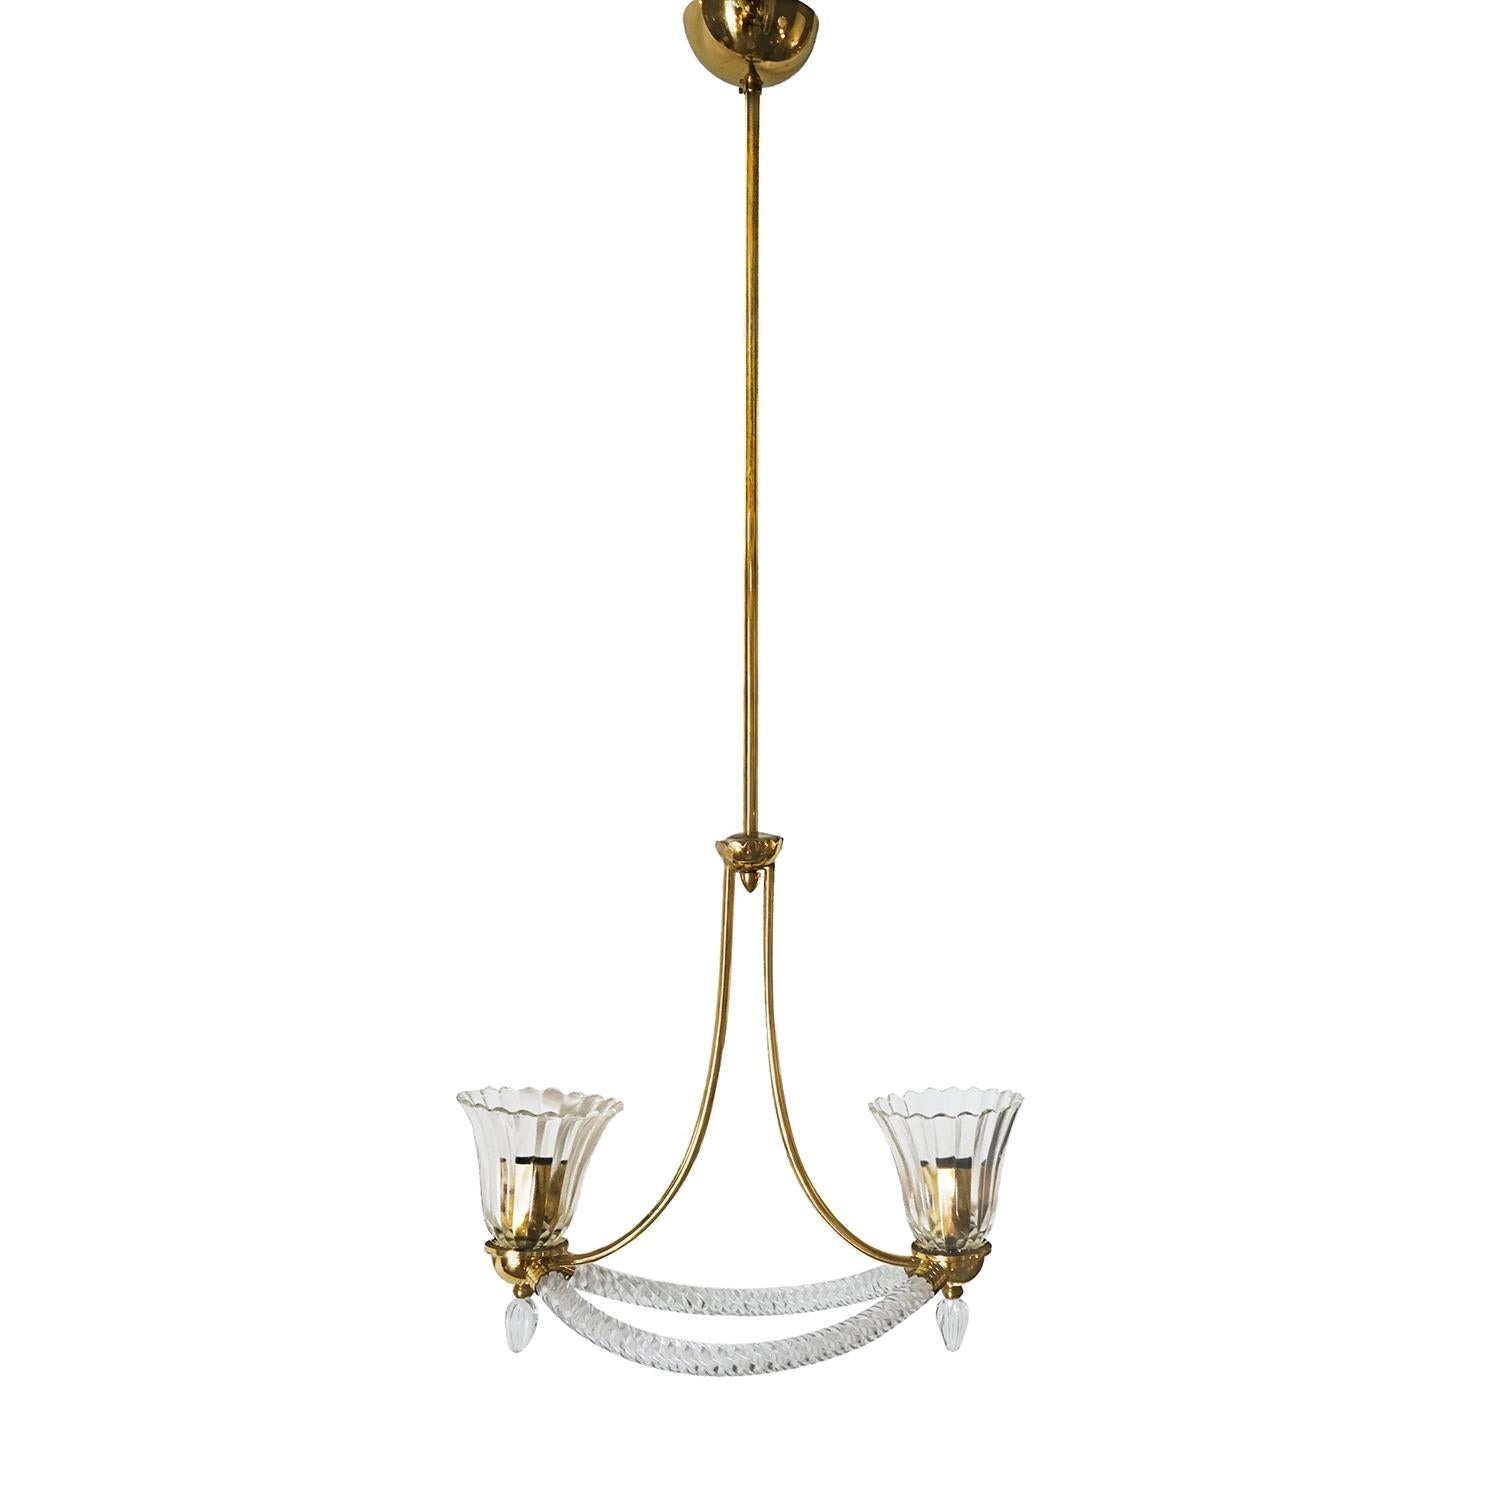 A vintage Mid-Century Modern Italian ceiling lamp made of a brass structure and hand blown Murano glass, having two “ Rostrato “ light shades, enhanced by brass details, supported by two curved Murano glass arms, each of which are featured with a